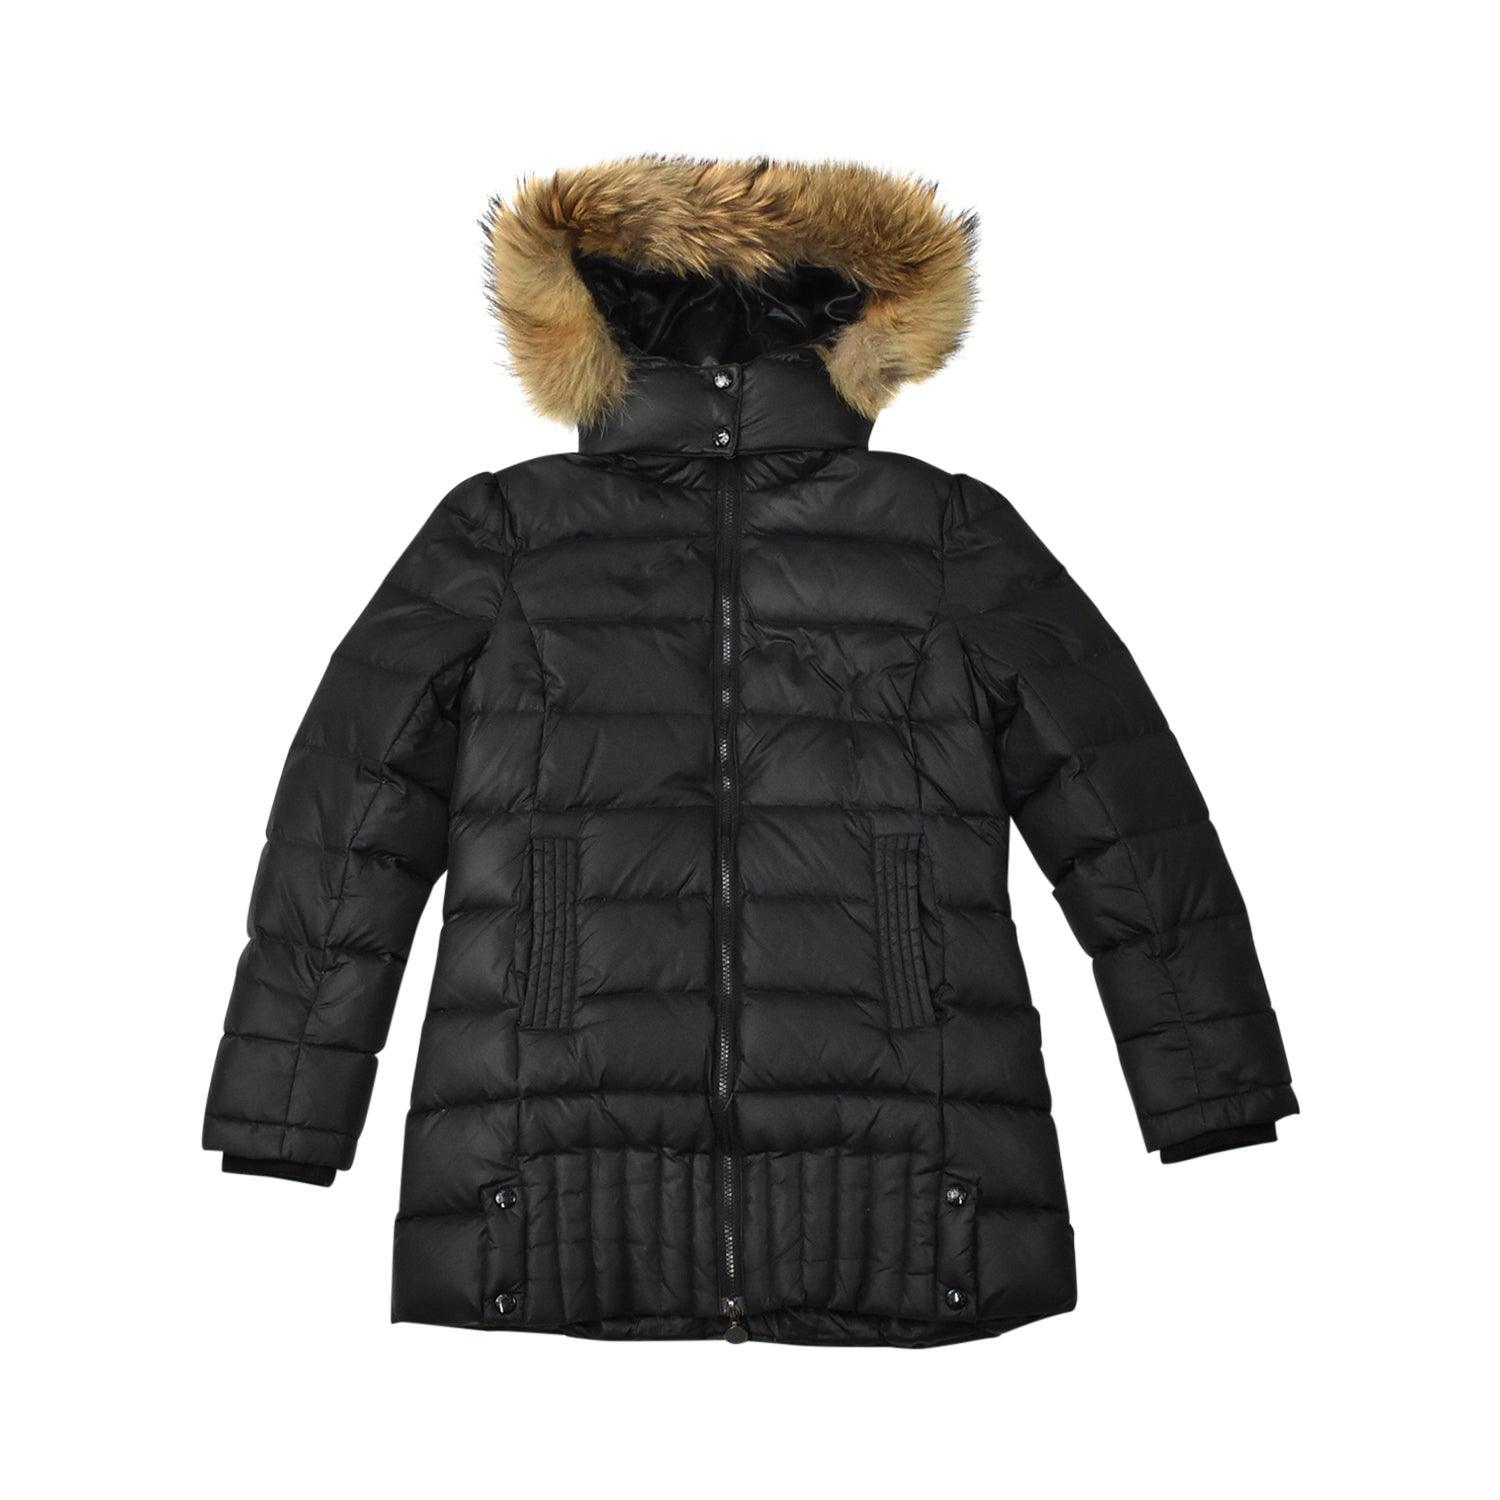 Moncler Parka - Women's 0 - Fashionably Yours